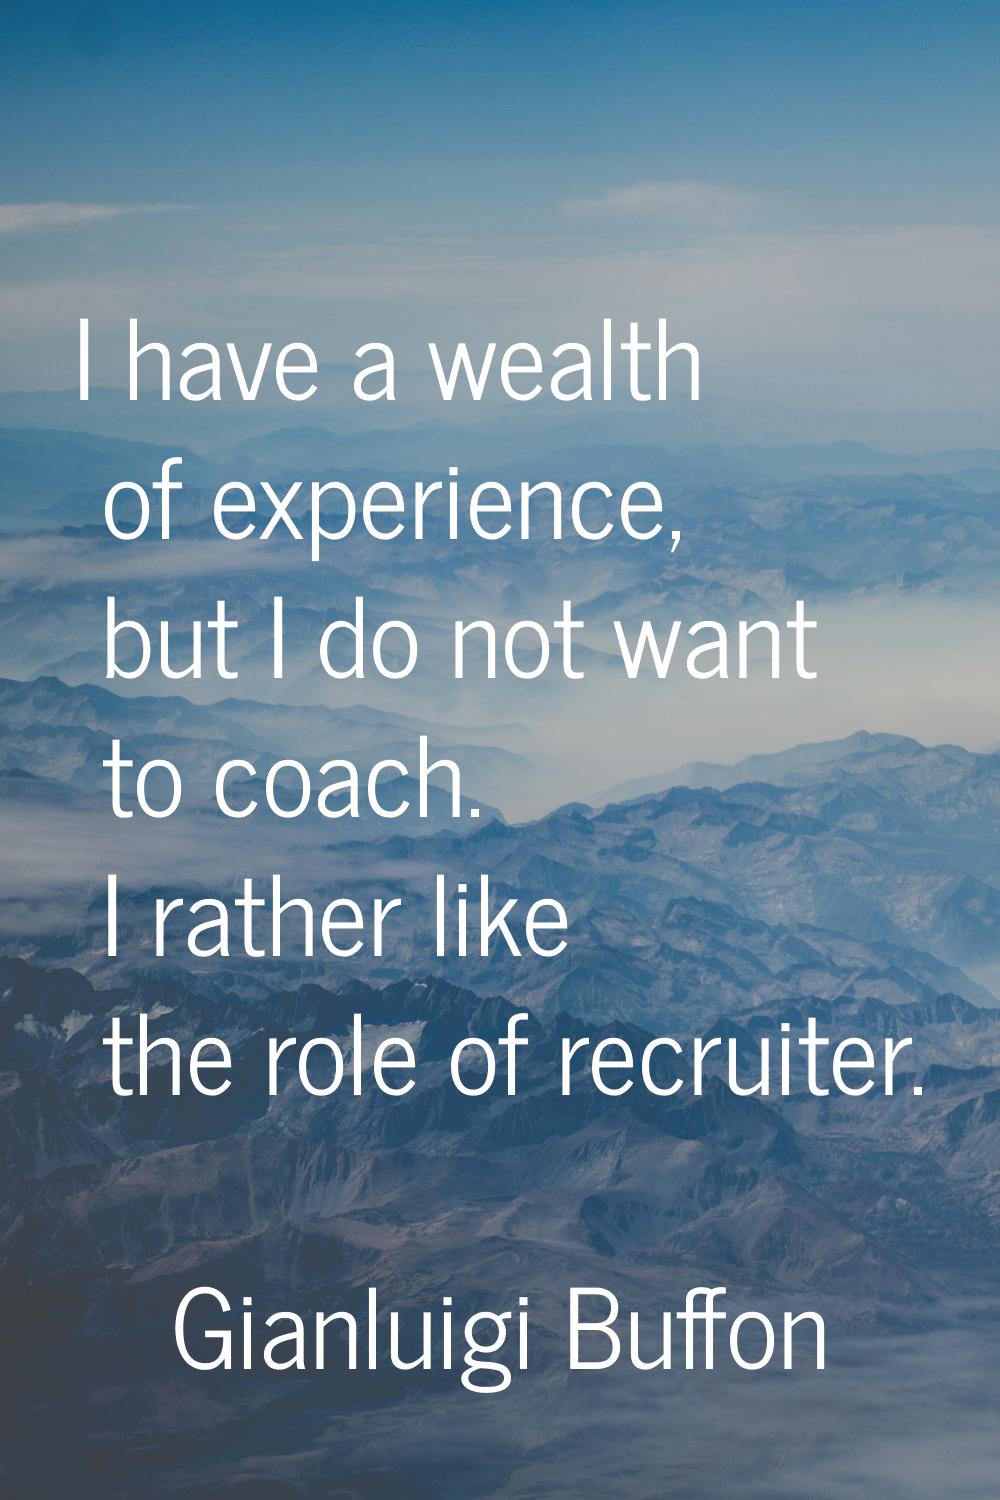 I have a wealth of experience, but I do not want to coach. I rather like the role of recruiter.